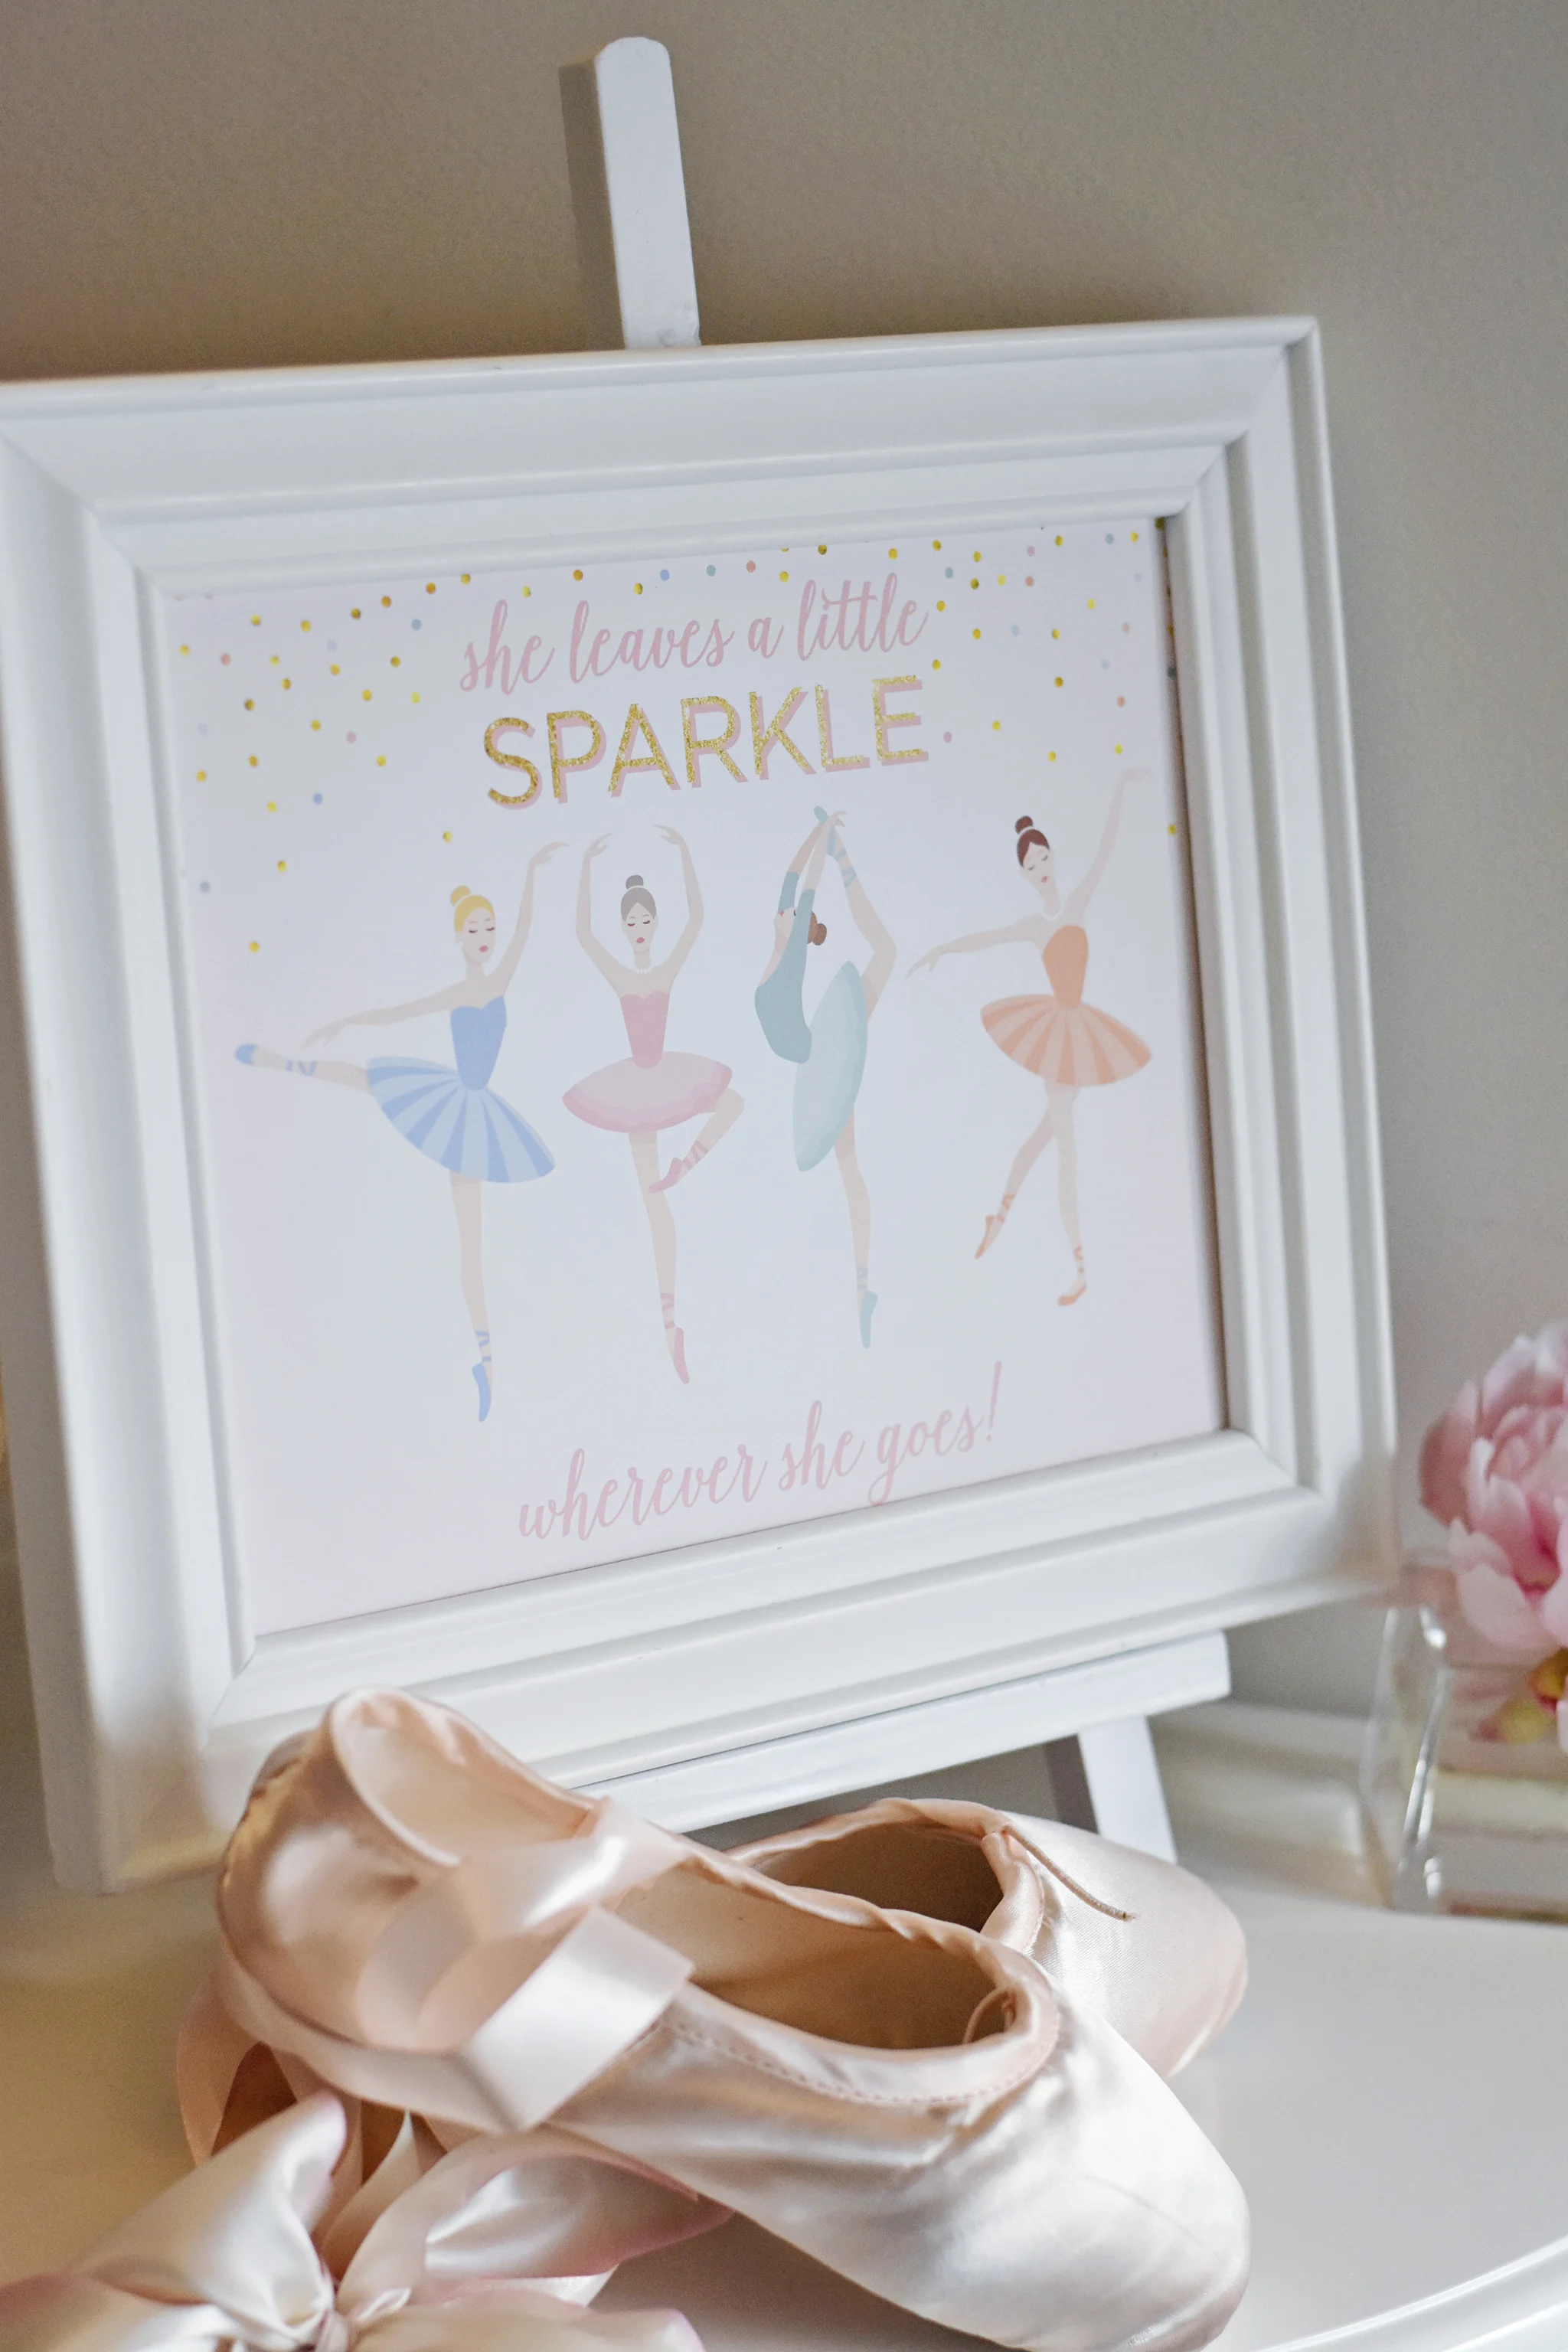 Printable Party Signage: She leaves a Sparkle wherever she goes!